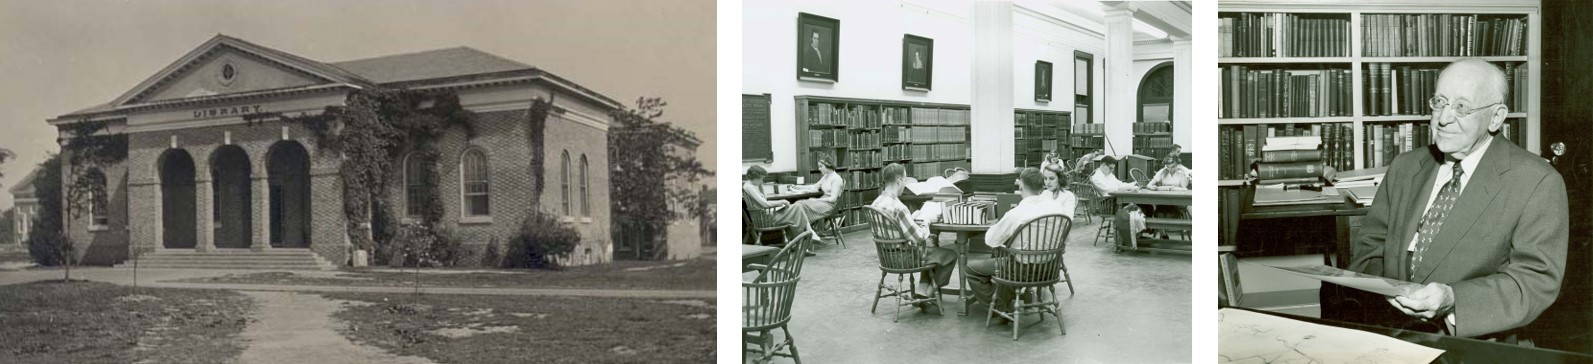 Three photos, from left to right: Photo of the Library, students studying in the library, Earl Gregg Swem portrait.